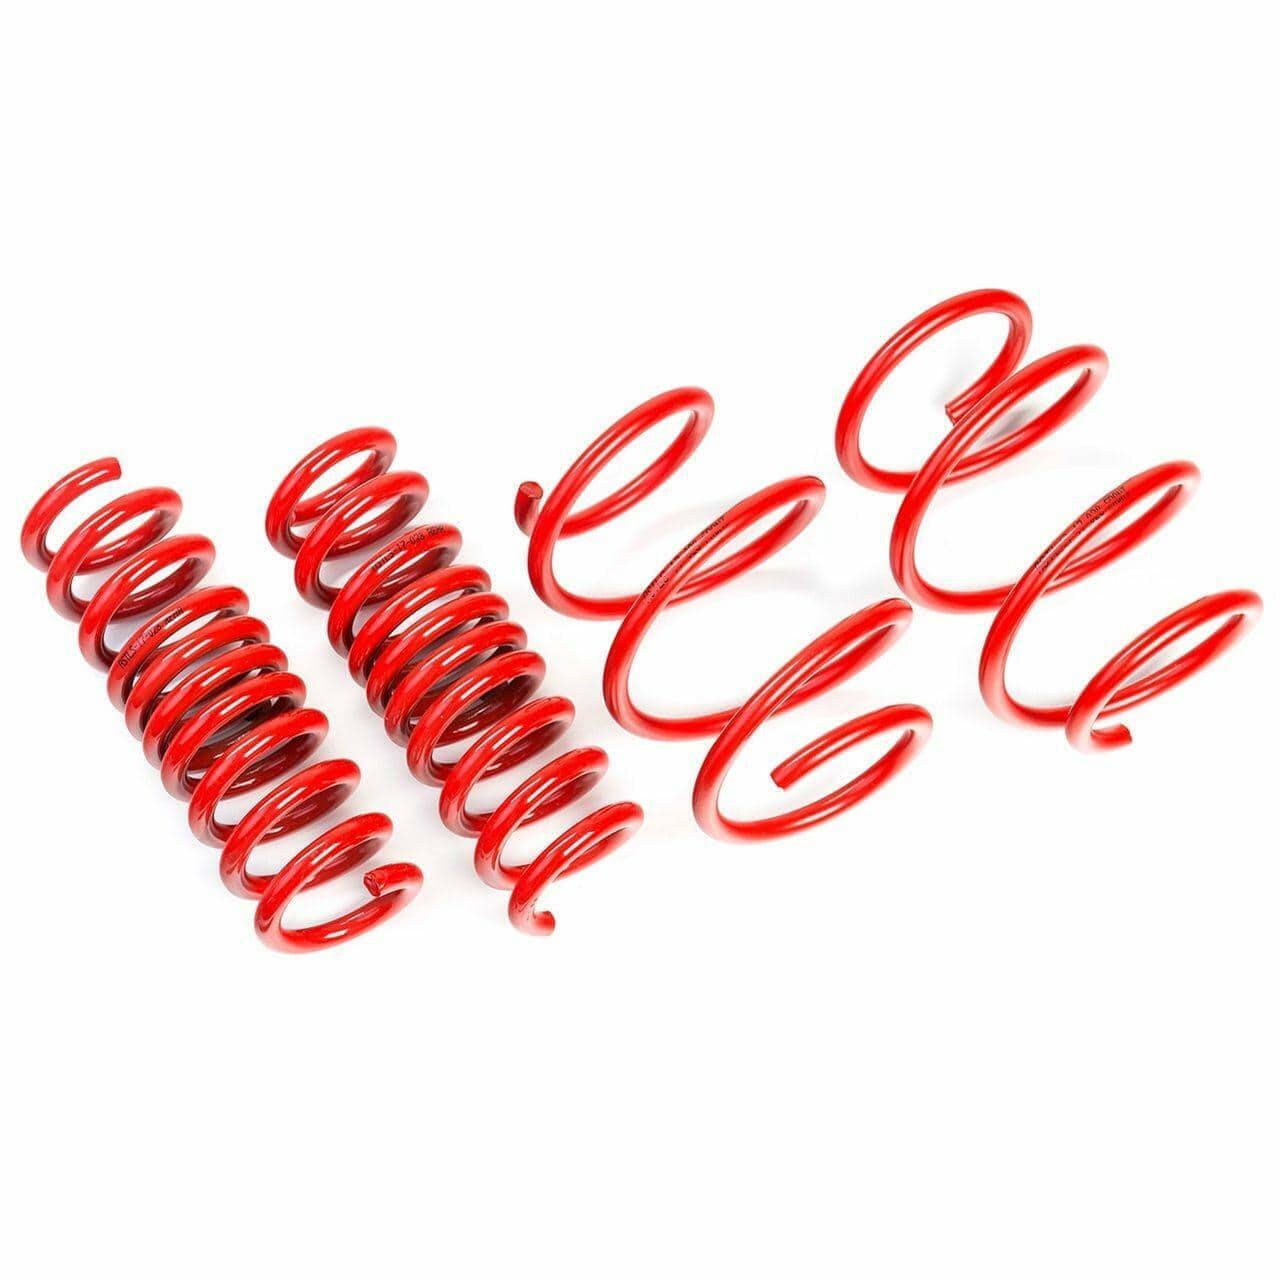 AST Suspension Lowering Springs (40MM/40MM) - 1997-1998 Mazda 323 F 3-Door/Coupe 1.5/1.8 4CYL/2.0 6CYL (BA) ASTLS-14-1129